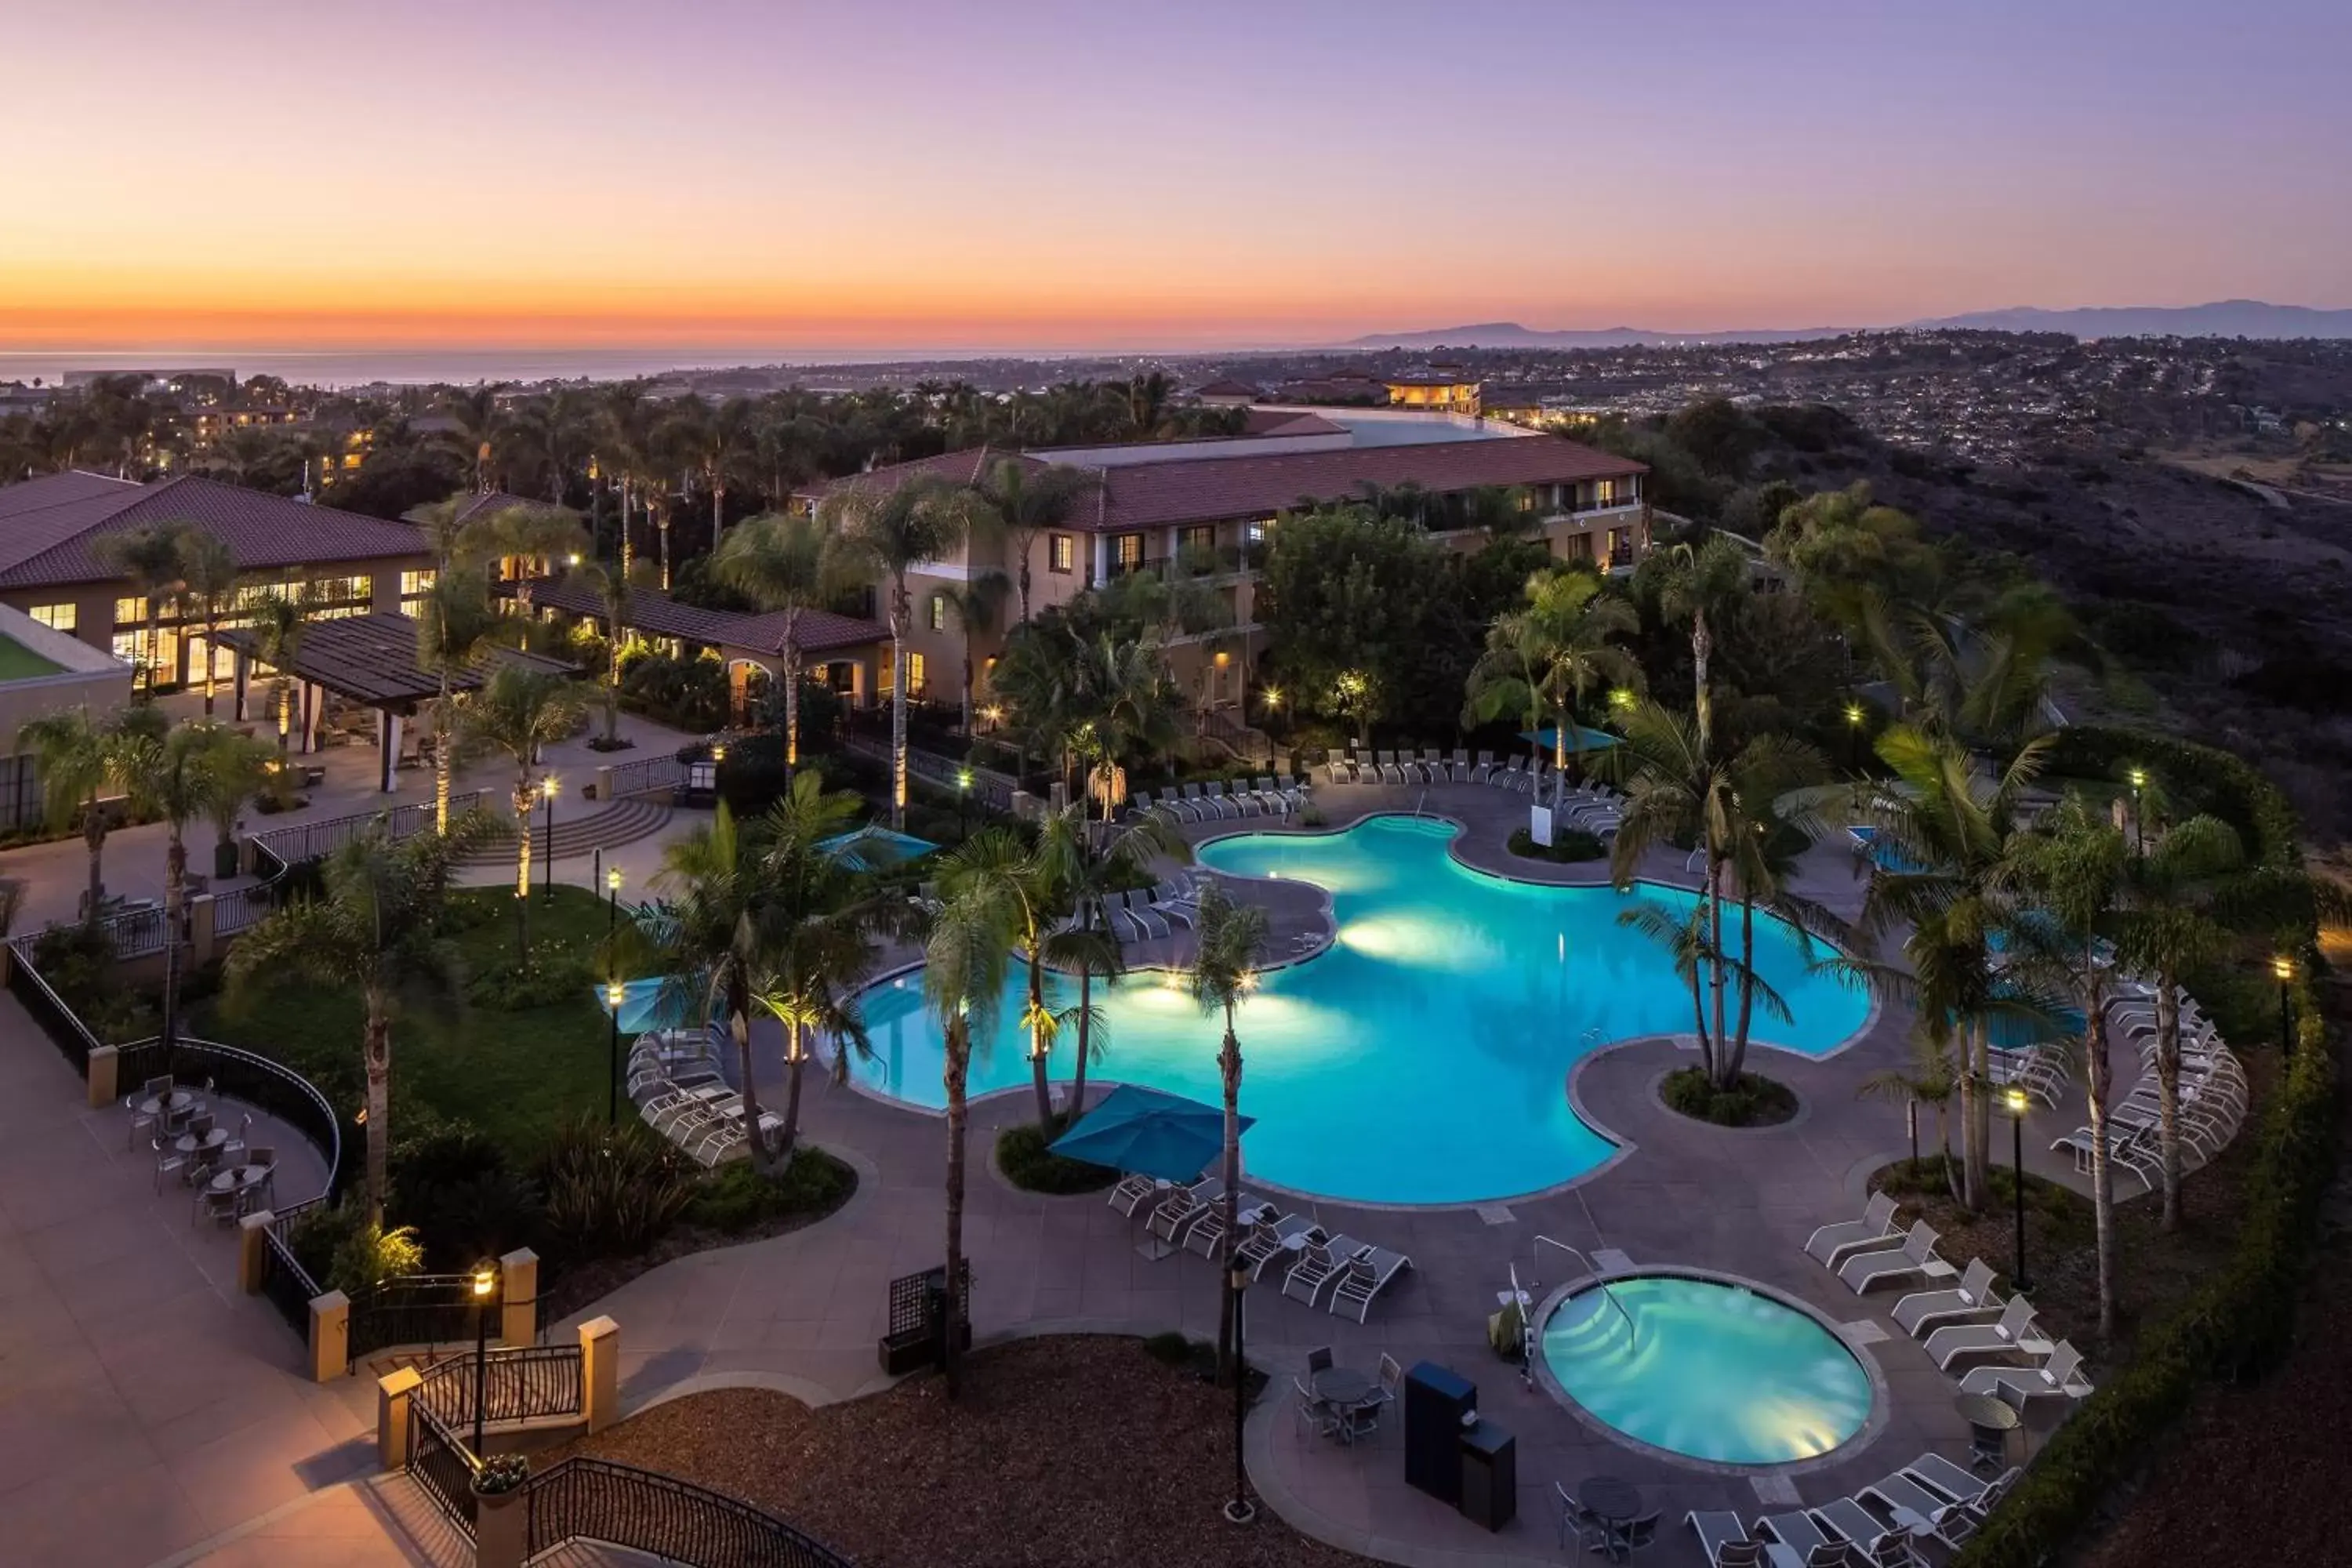 Property building, Pool View in The Westin Carlsbad Resort & Spa